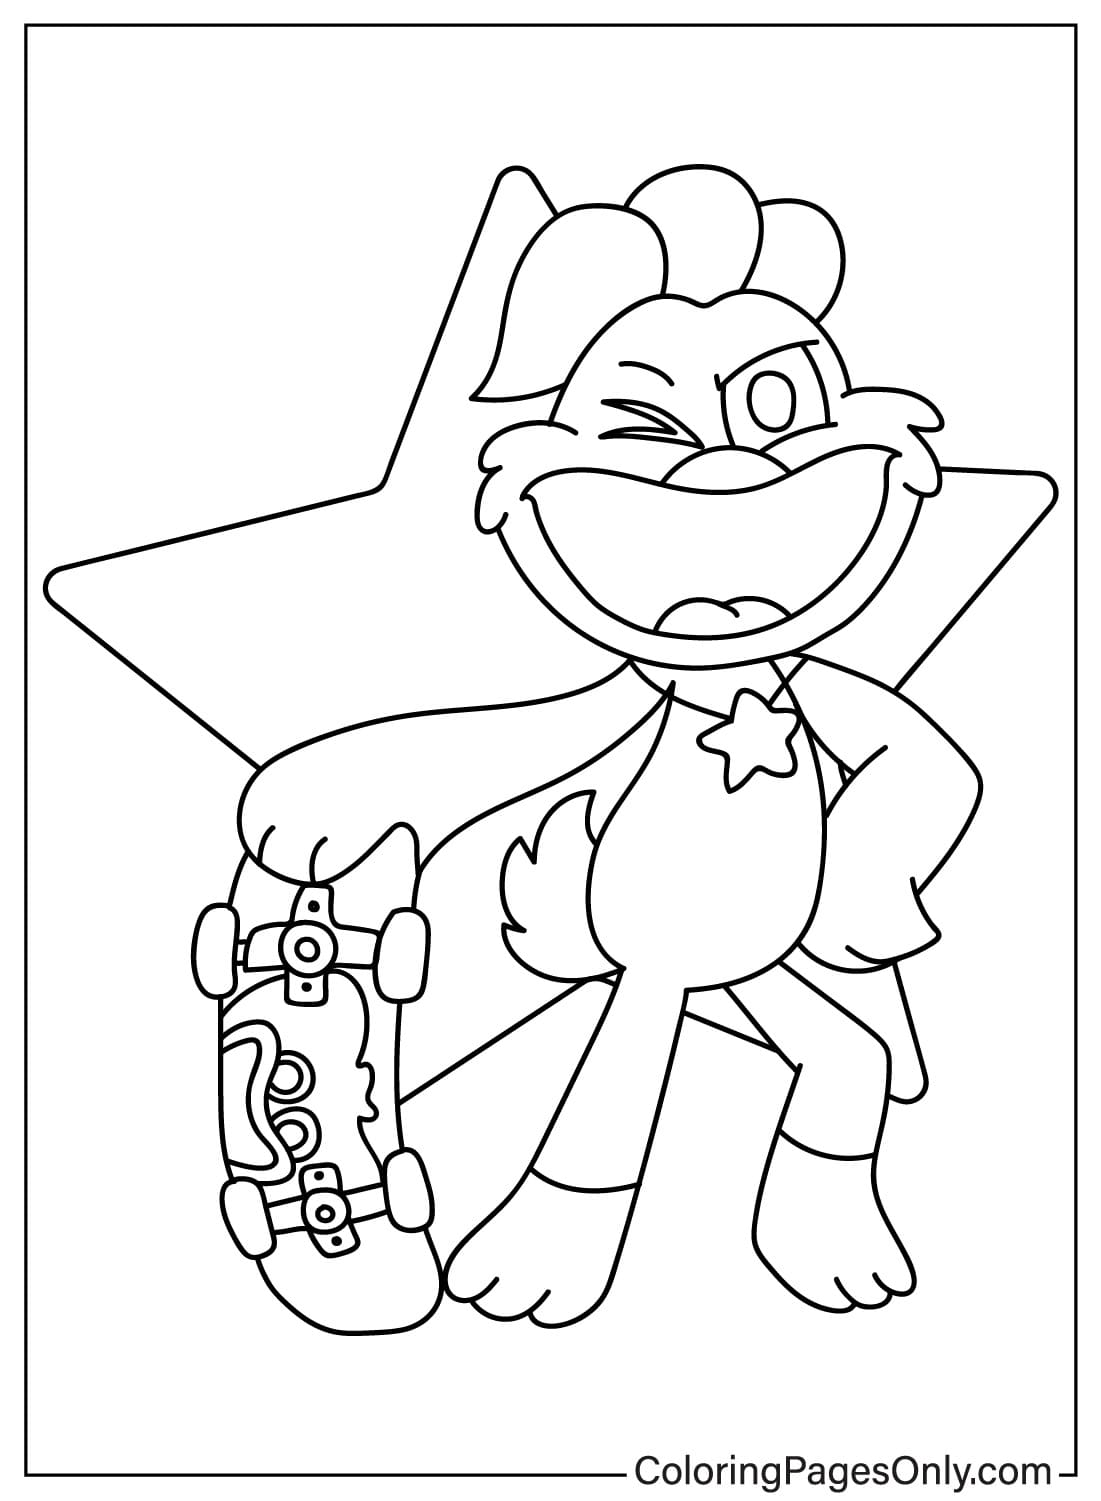 KickinChicken Coloring Page - Free Printable Coloring Pages